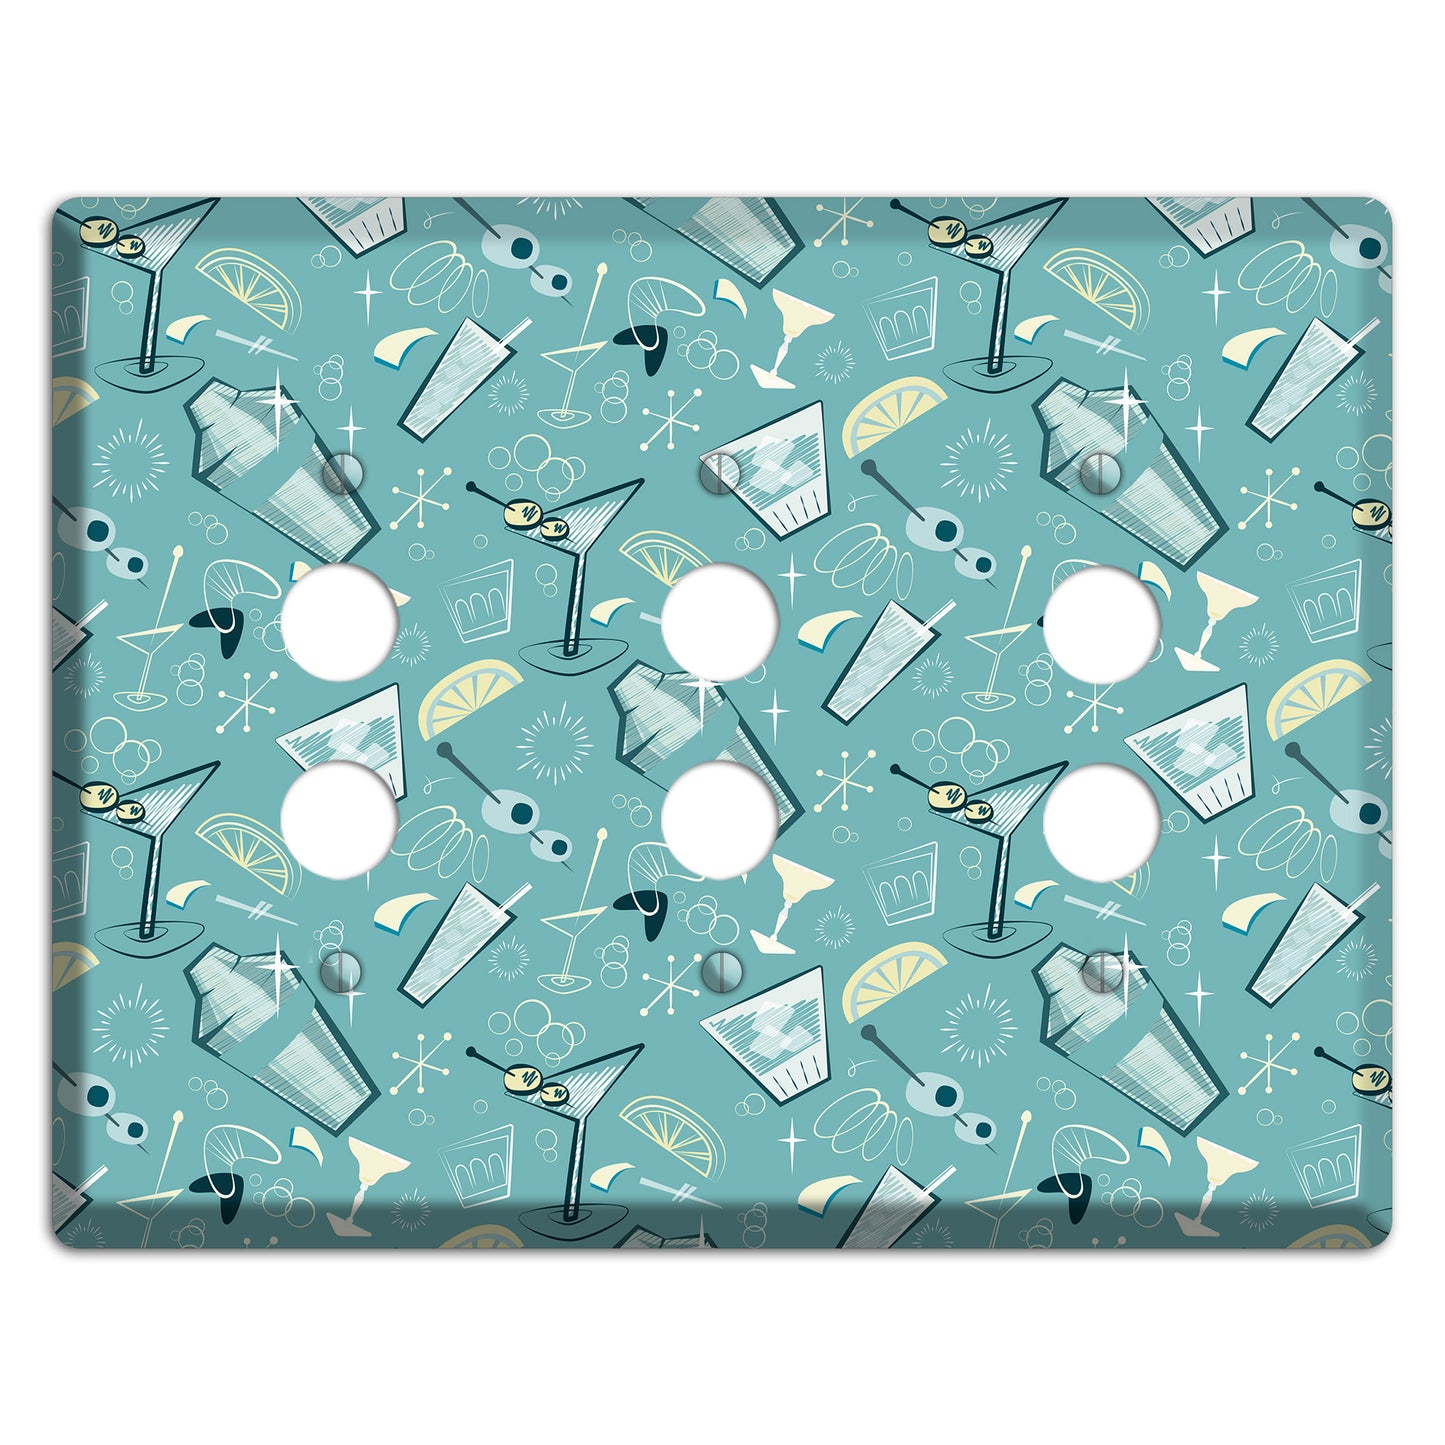 Retro Cocktails Teal 3 Pushbutton Wallplate